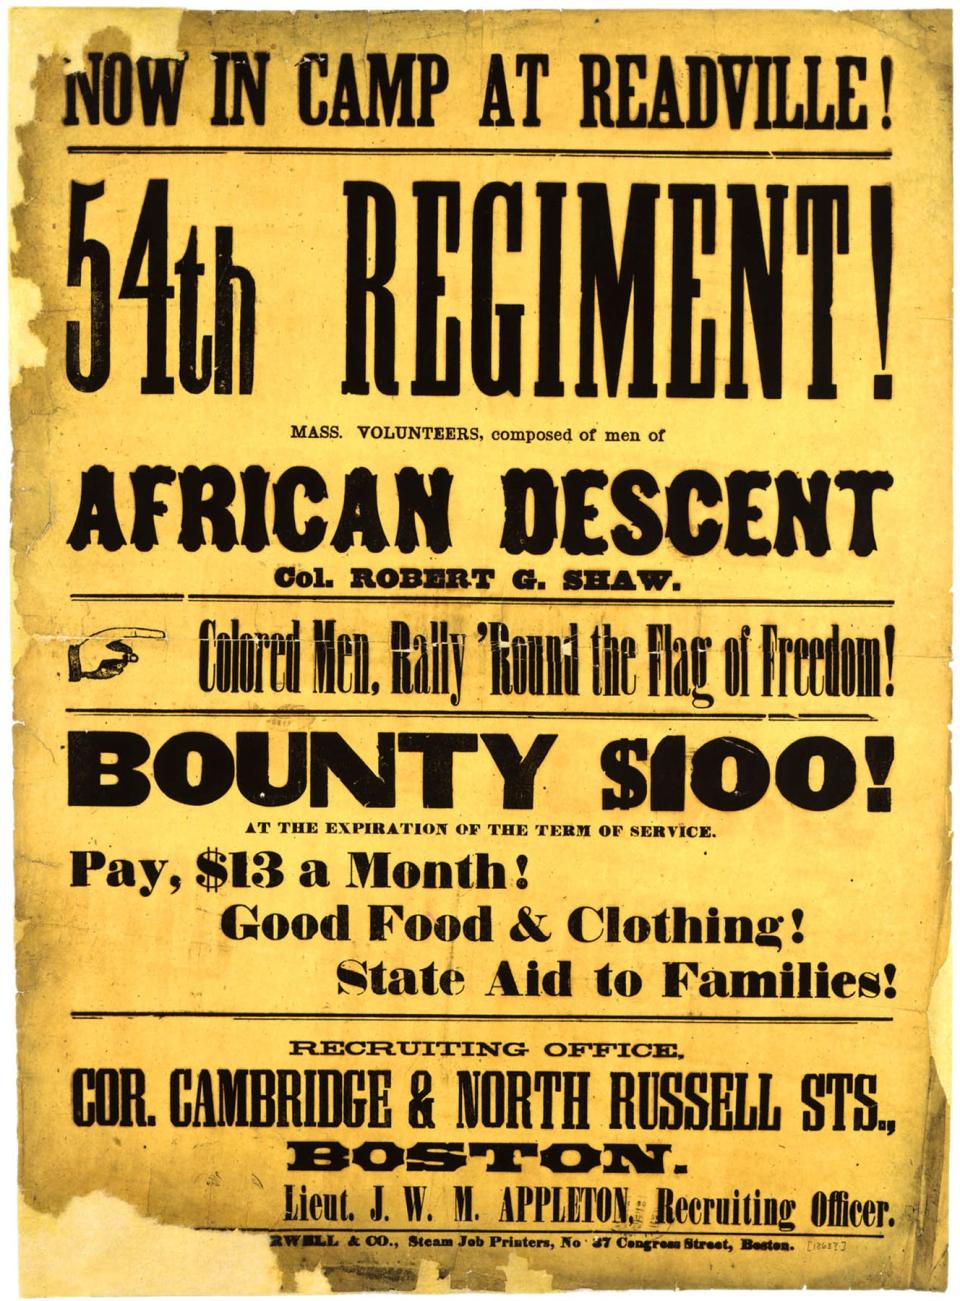 By the middle of February 1863, recruiting for the 54th Massachusetts Regiment was underway. Newspaper advertisements and recruiting posters encouraged Black men to enlist. Twenty-five men responded promptly, and by the end of the first week of enlistments 72 recruits were present at Camp Meigs in Readville (now Hyde Park), Massachusetts.